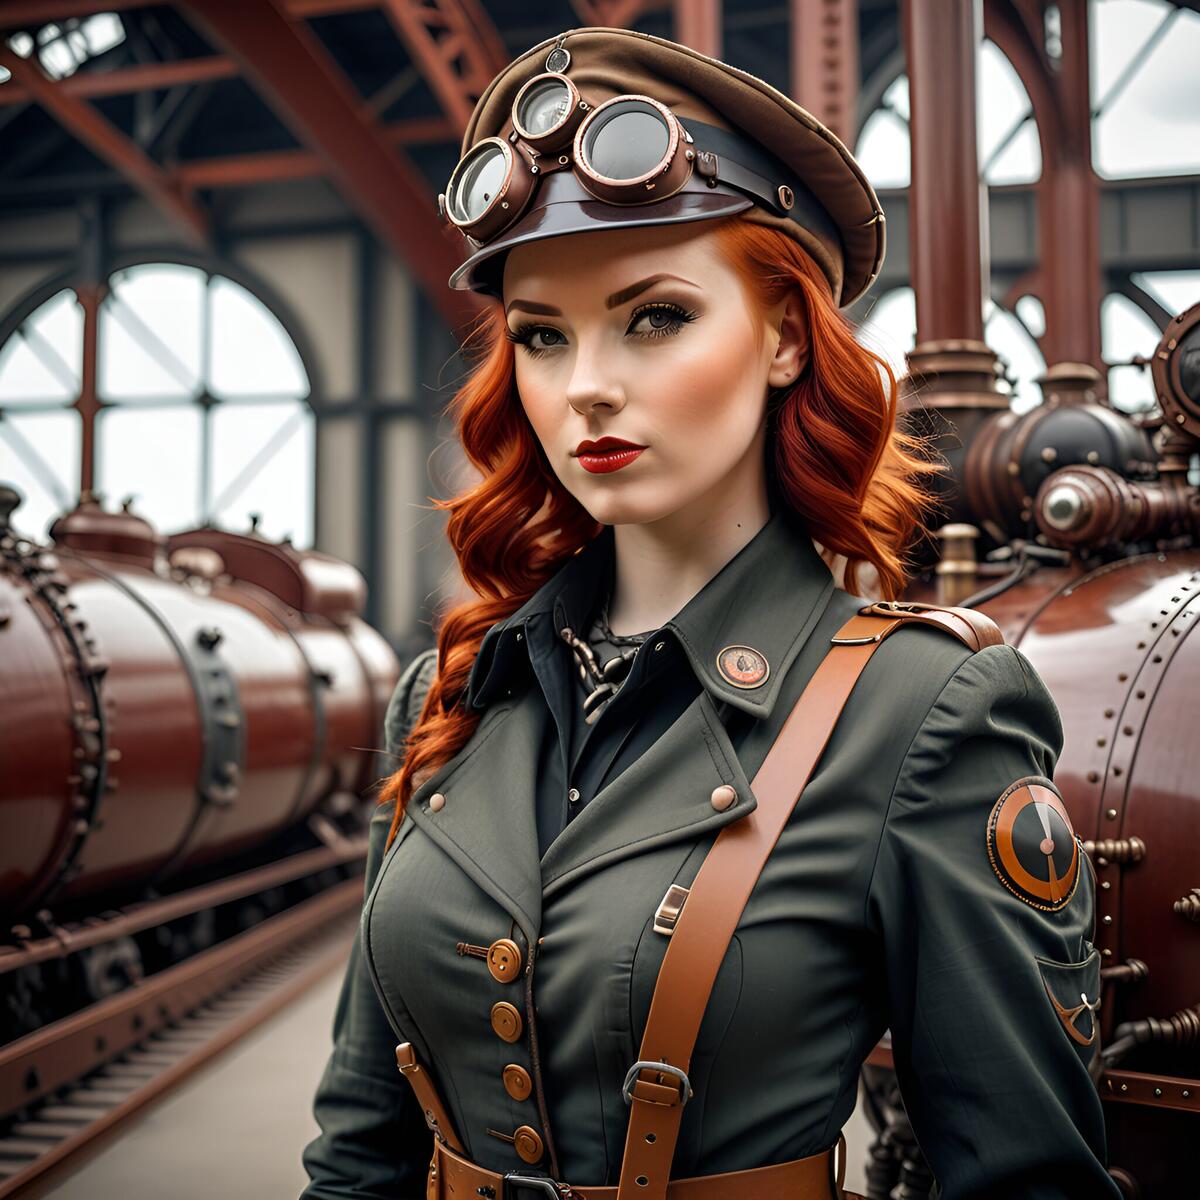 A redheaded girl in a military uniform